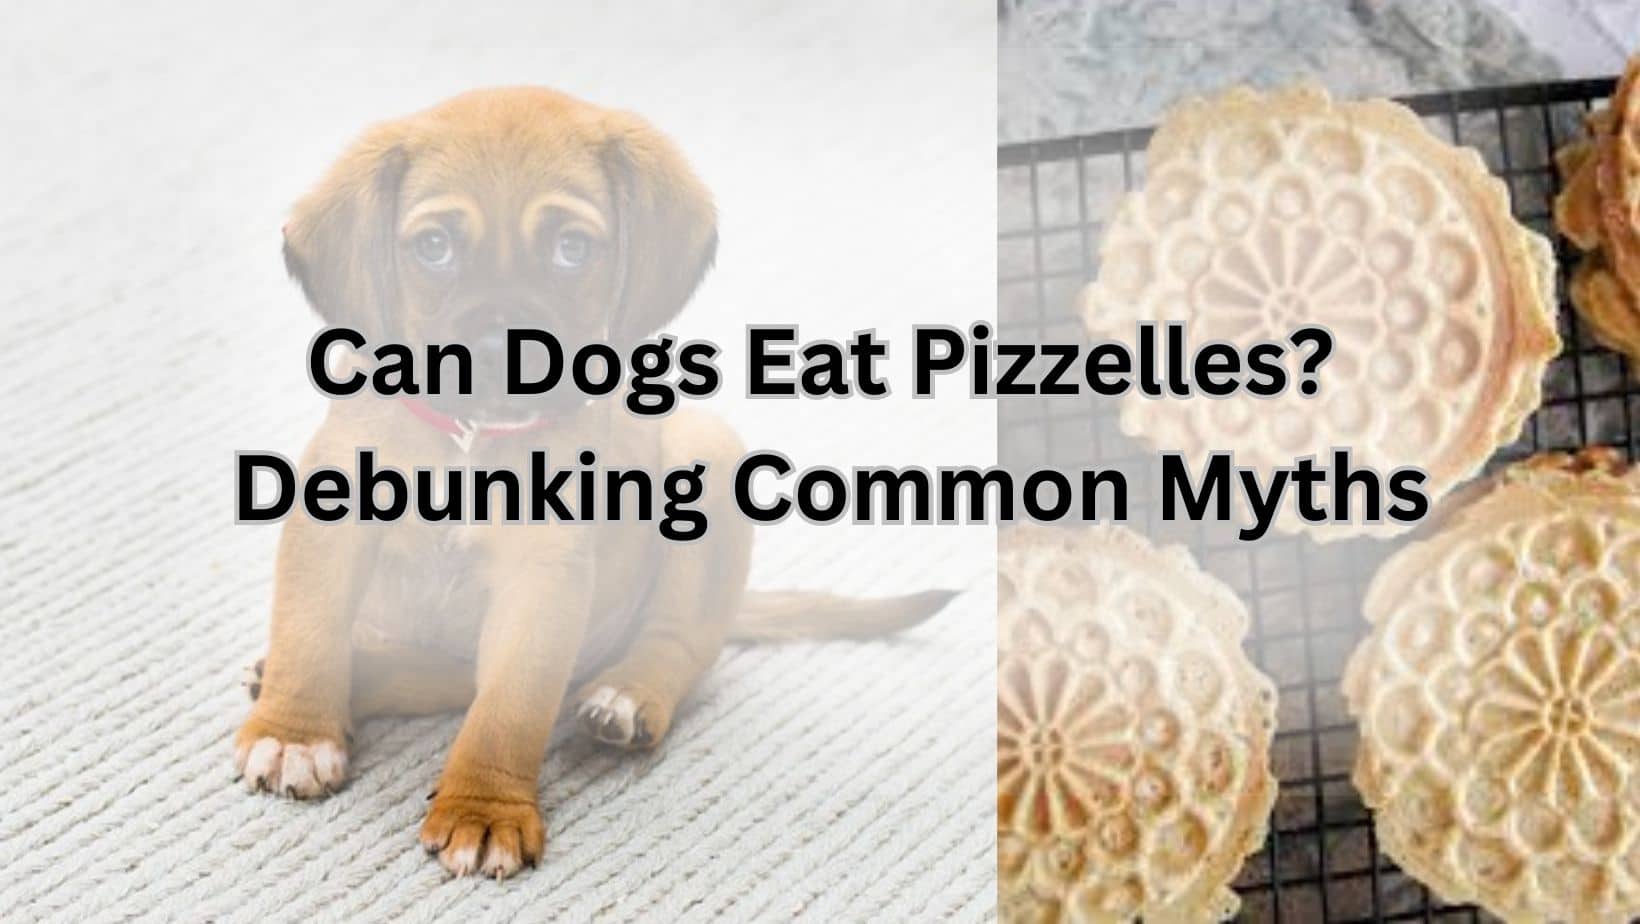 Pizzelles for dogs